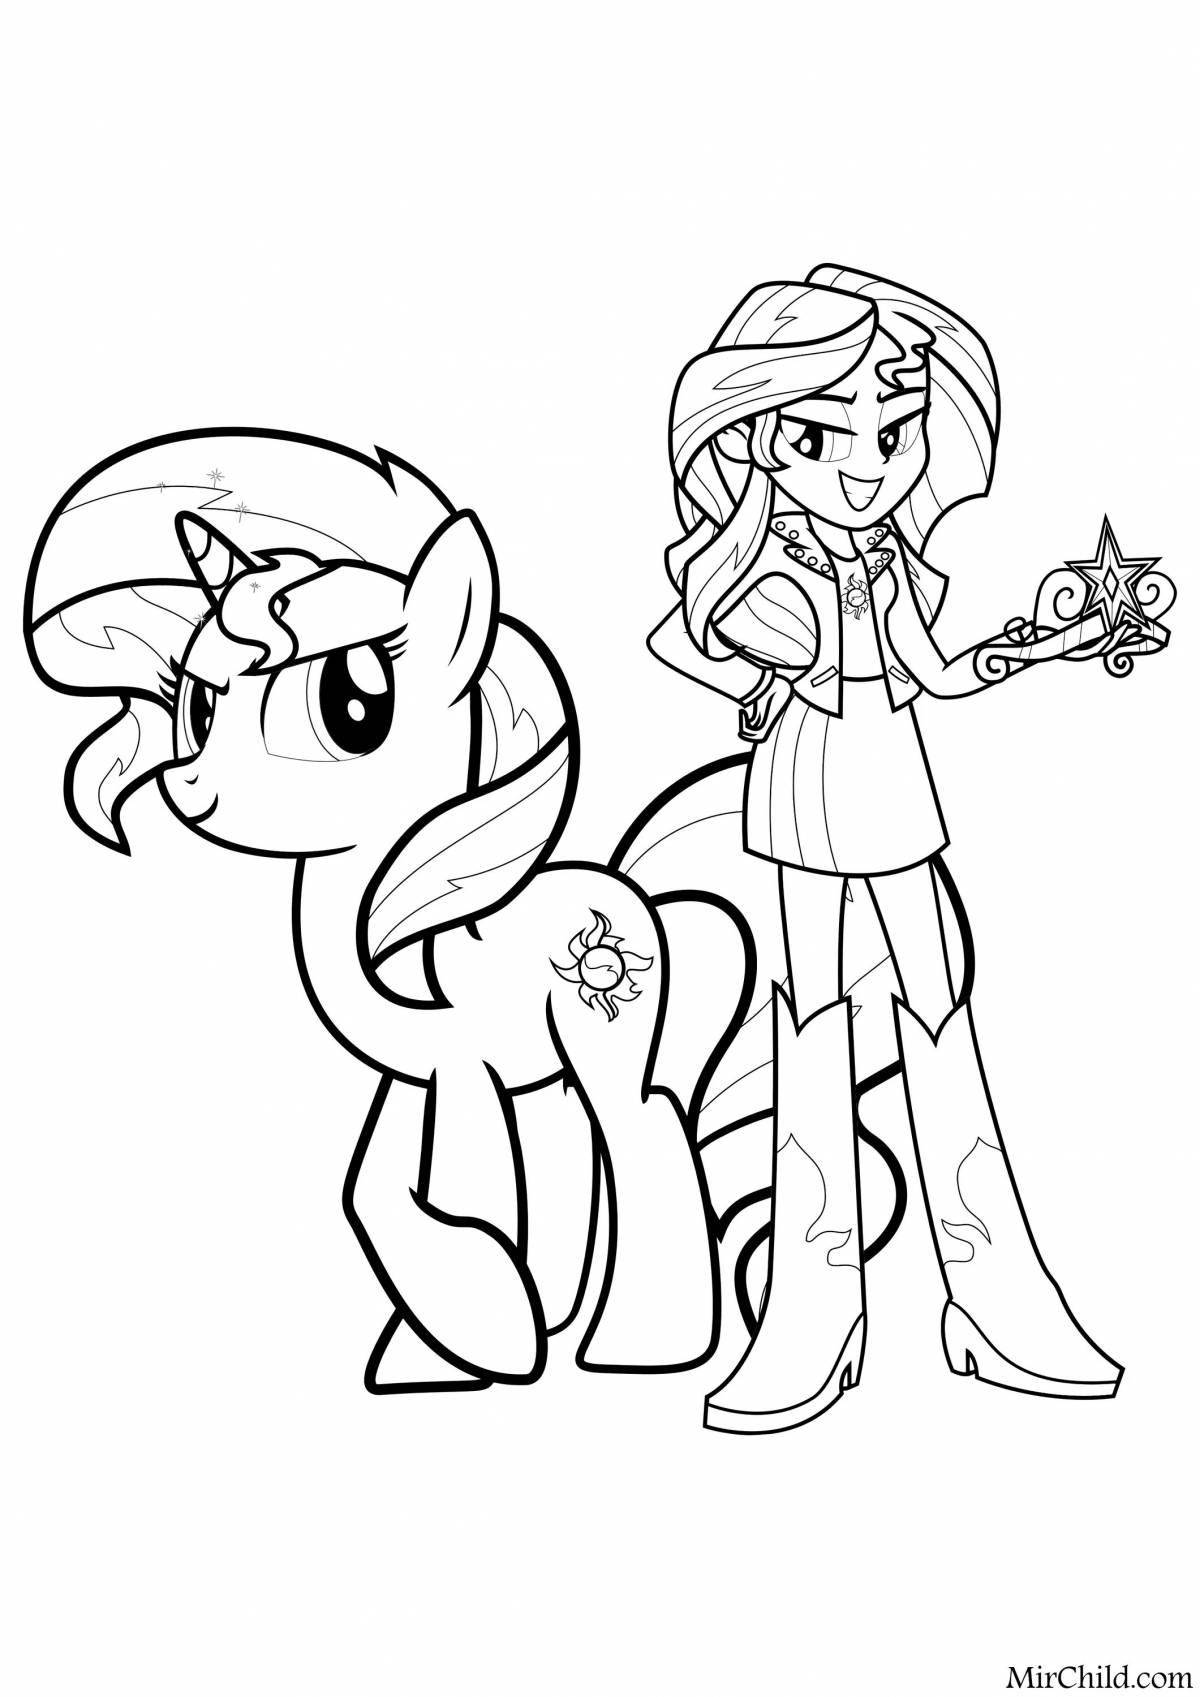 Glowing sunset shimmer coloring page